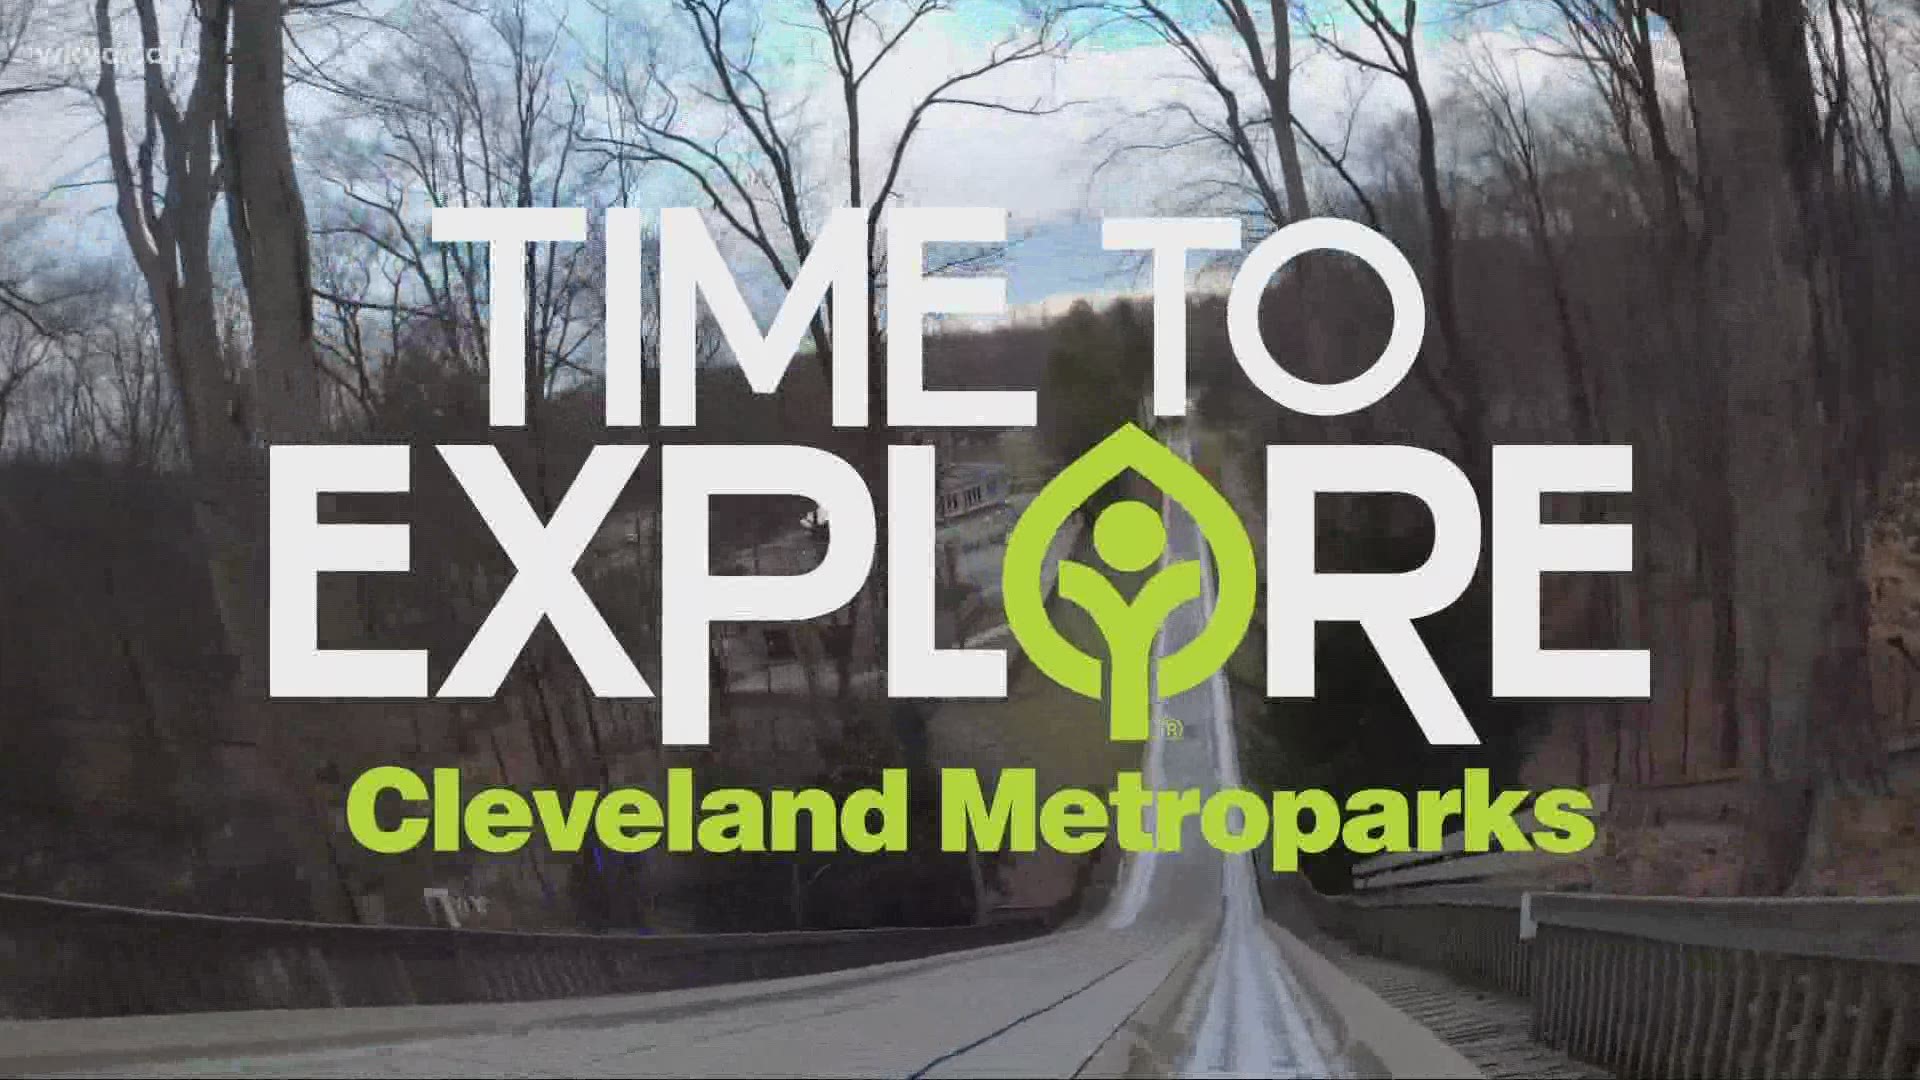 2021 is officially here and so is good ole Cleveland weather. Lindsay Buckingham has a look at how the Metroparks is tacking outdoor fun.